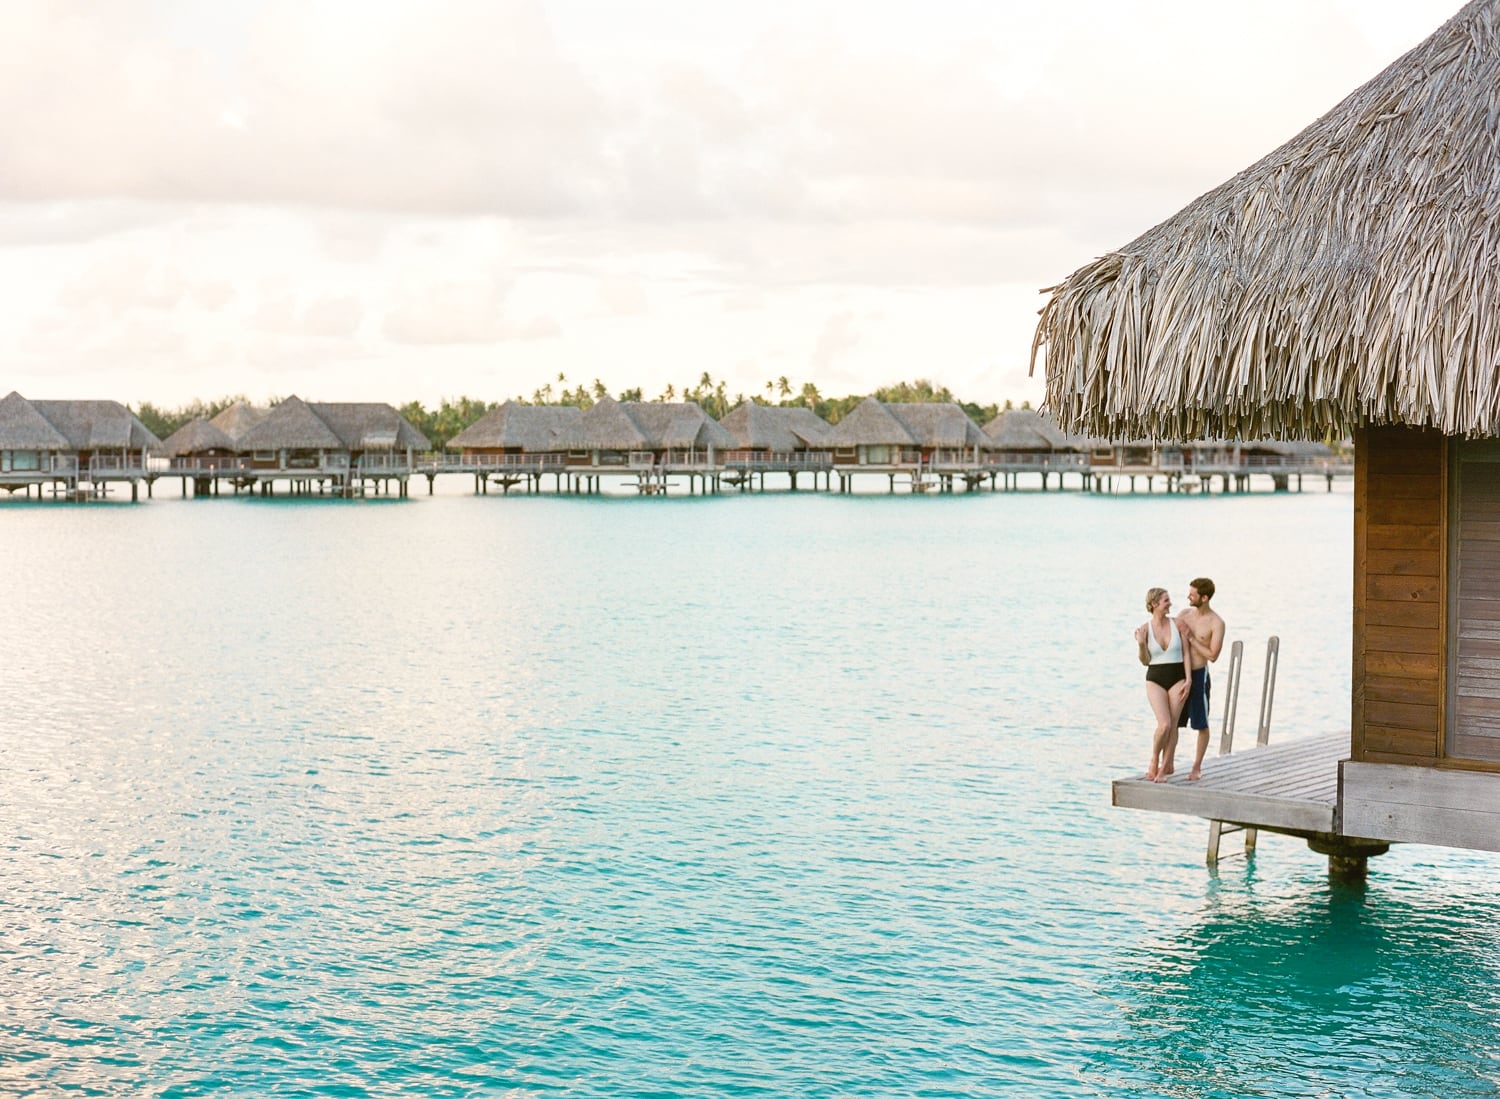 A couple on honeymoon on the desk of their overwater bungalow at the Intercontinental Bora Bora, scenic view with the landscape and blue water